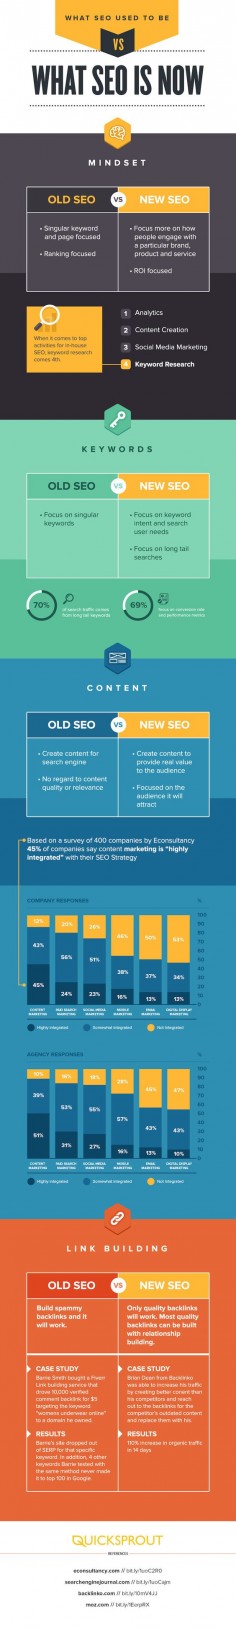 What SEO Used to Be Versus What #SEO Is Now - #infographic #infografía